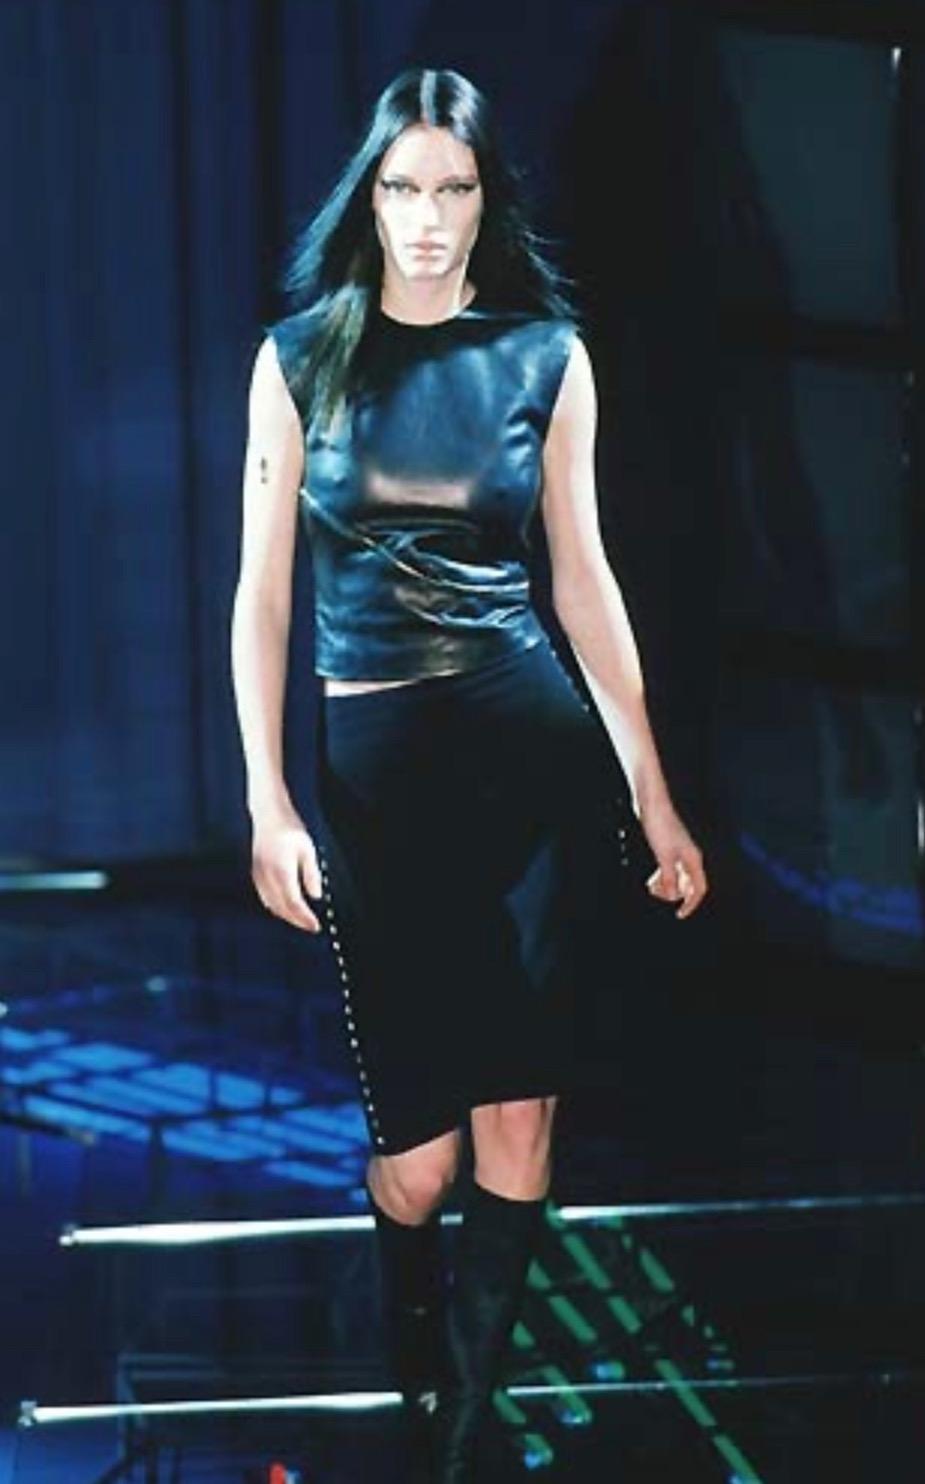 TheRealList presents: an asymmetric zipper accented leather crop top designed by Donatella for the Gianni Versace Fall/Winter 1998 collection. Debuting on look 3 on the season's menswear runway, this piece is constructed of soft leather perfectly